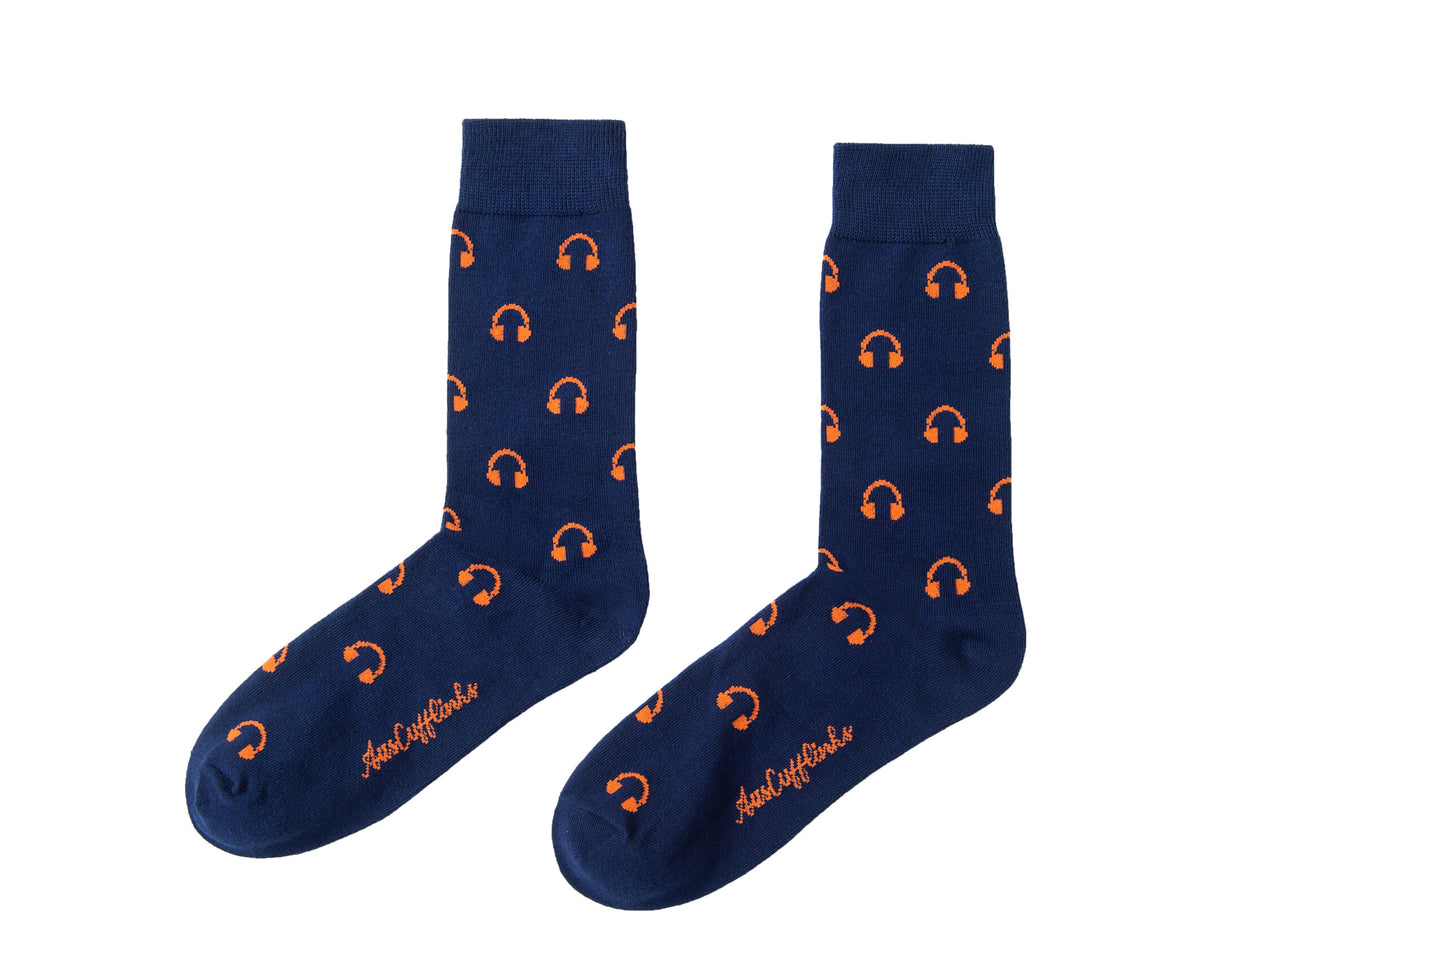 A pair of blue Headphones Socks with orange accents featuring headphones.